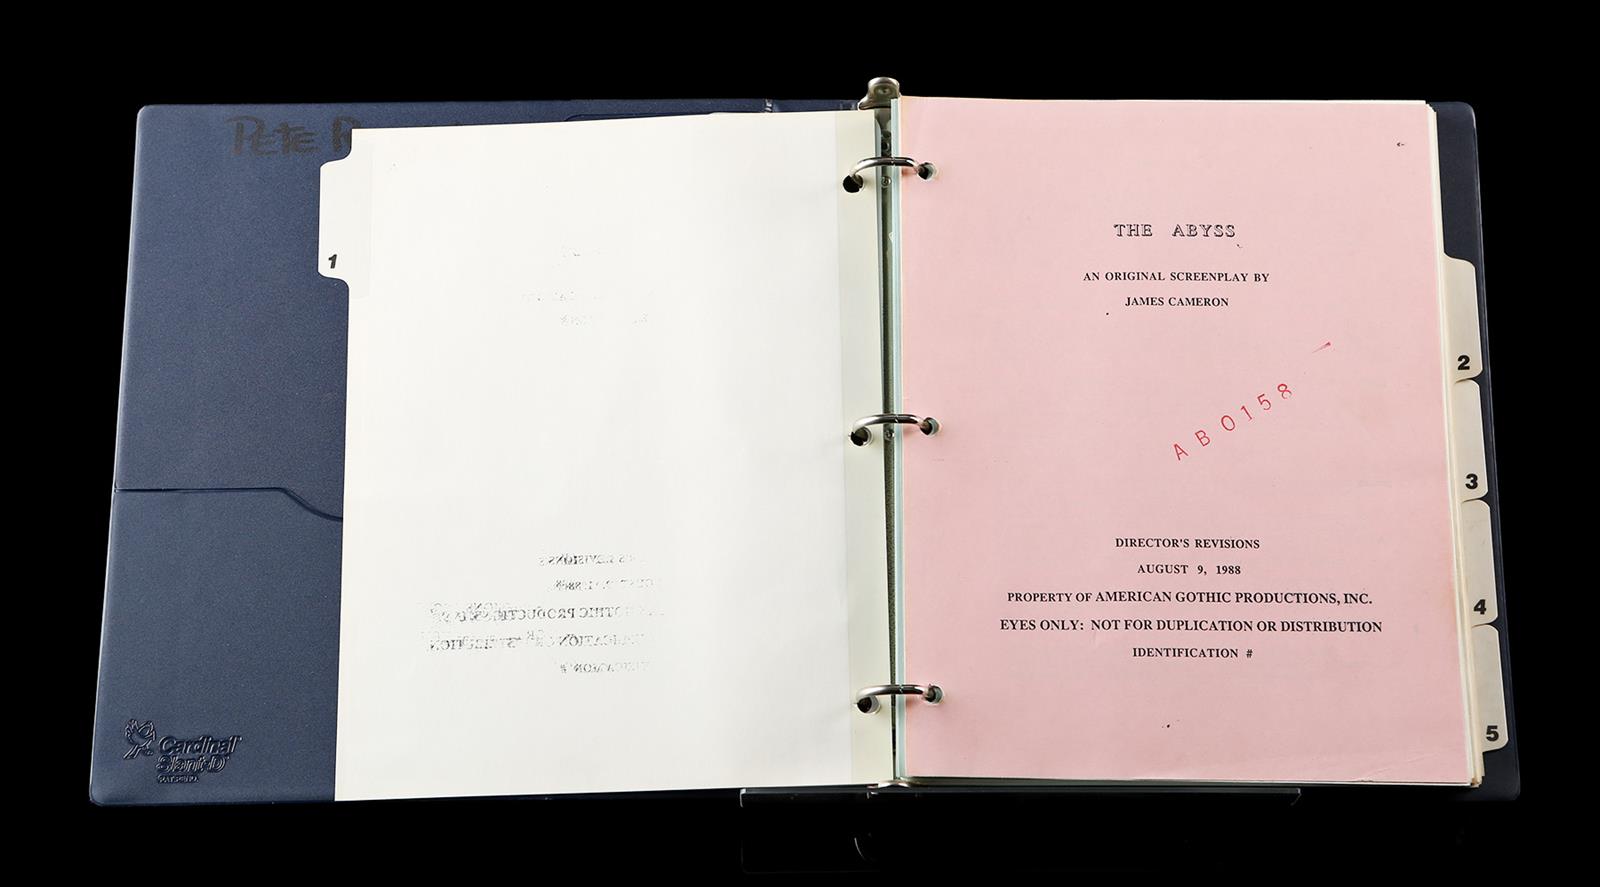 THE ABYSS (1989) - Script Binder and Underwater Slate A script binder and underwater slate from